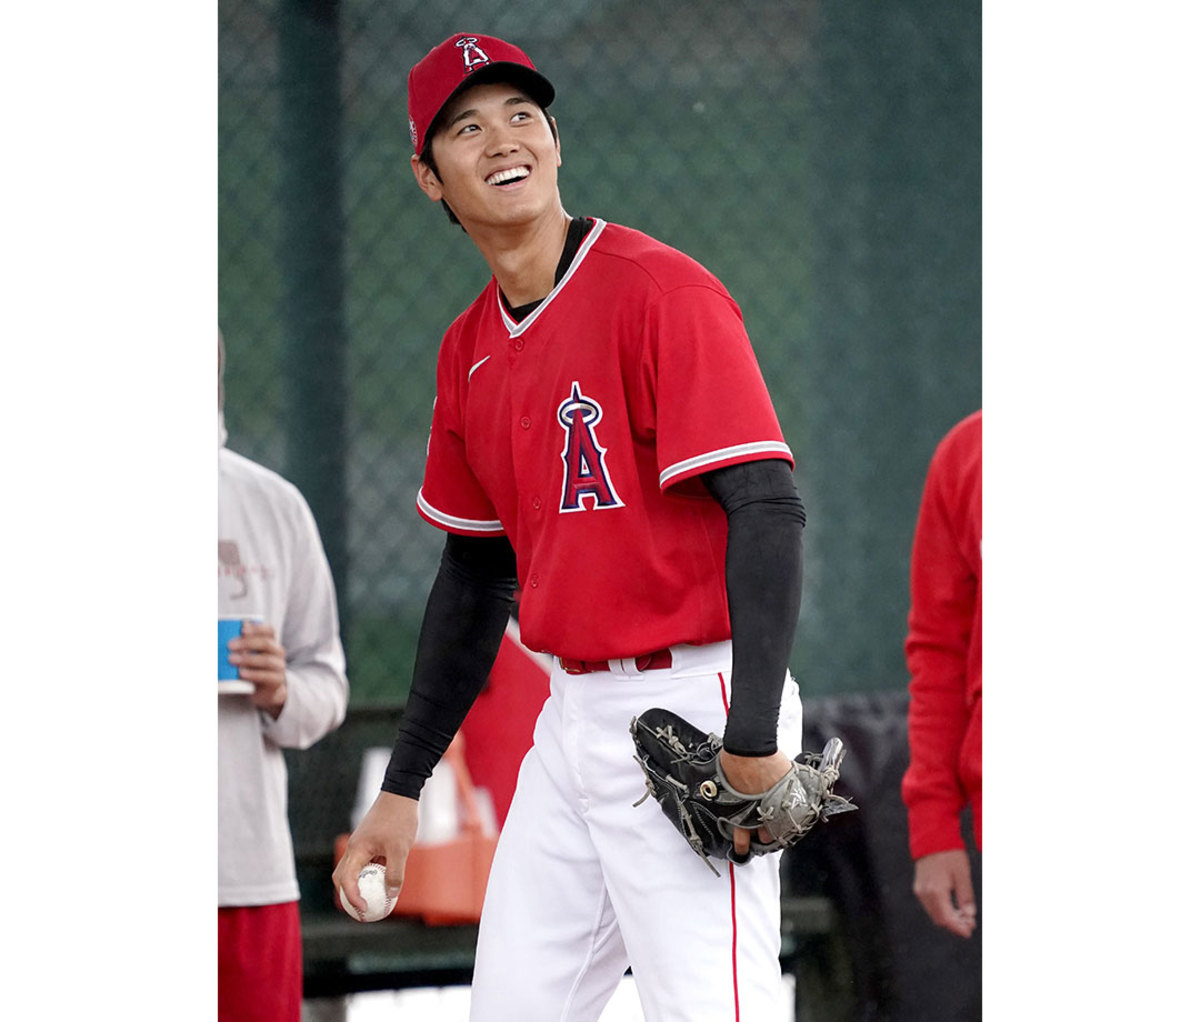 Shohei Ohtani of the Los Angeles Angels during the Major League Baseball spring training baseball workouts in Tempe, Arizona